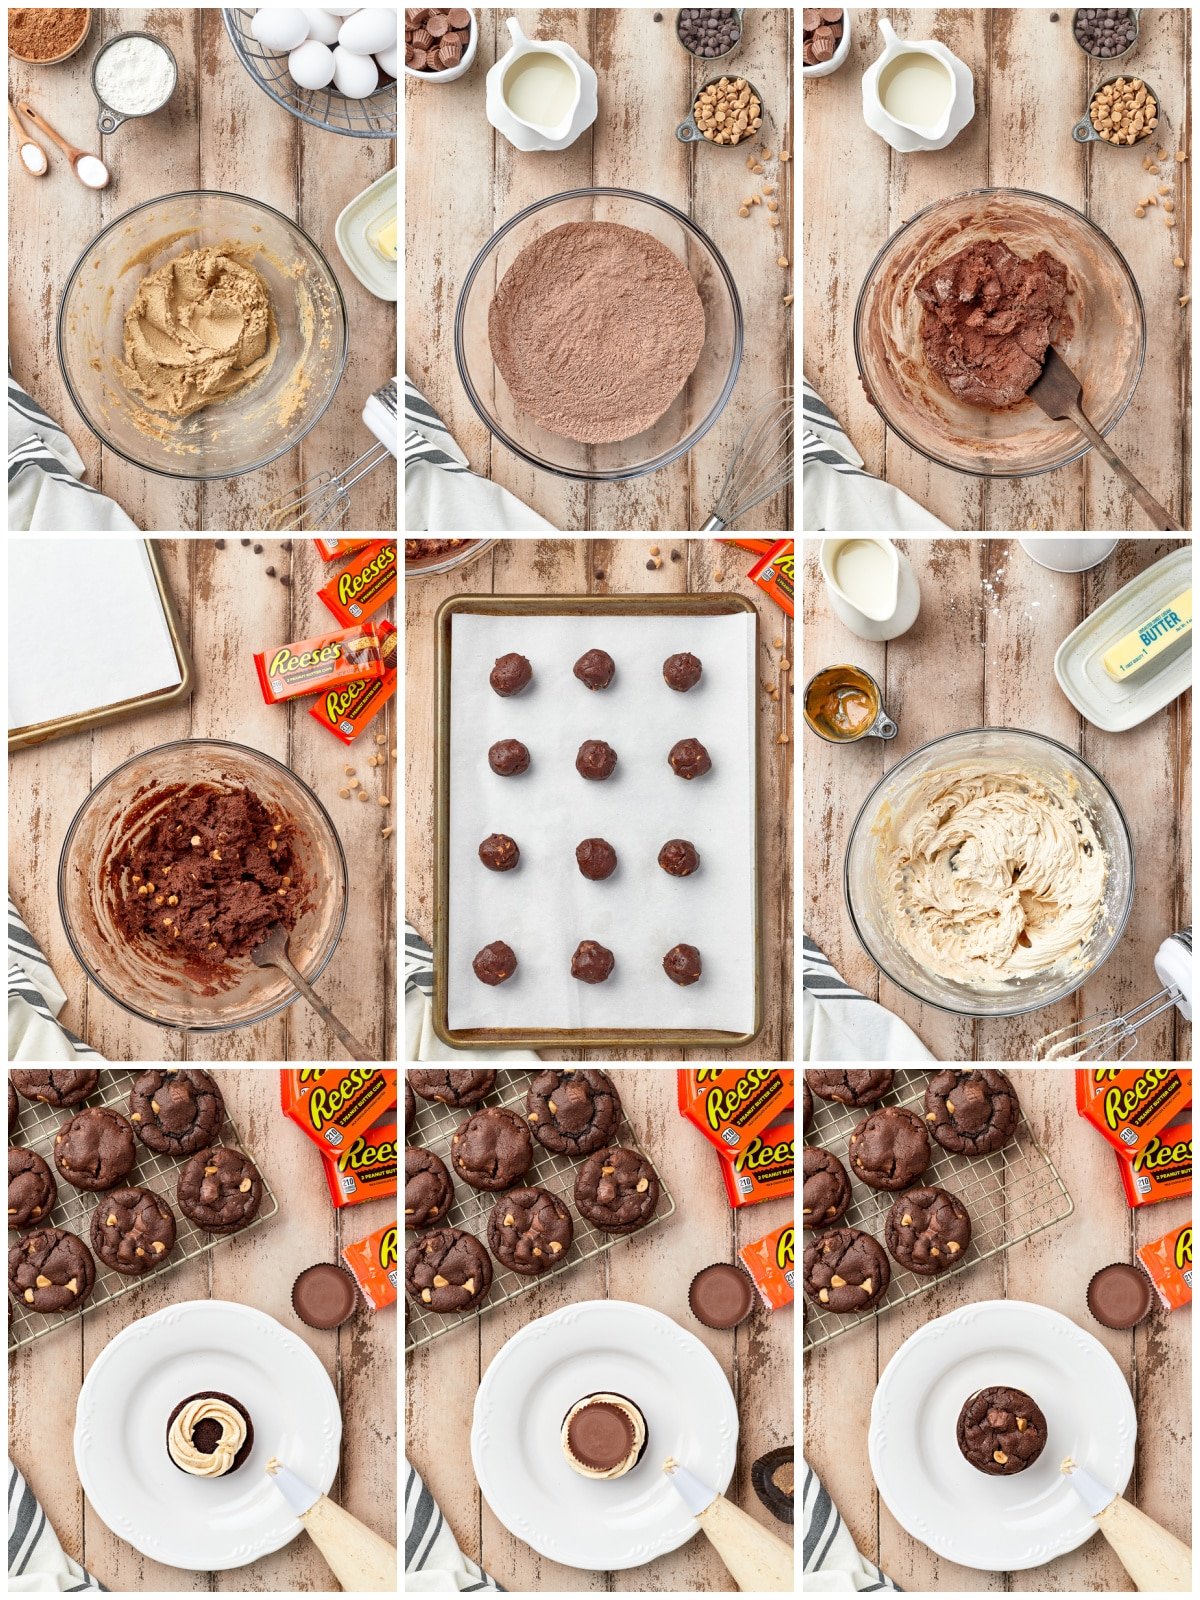 Step by step photos on how to make Reese's Sandwich Cookies.